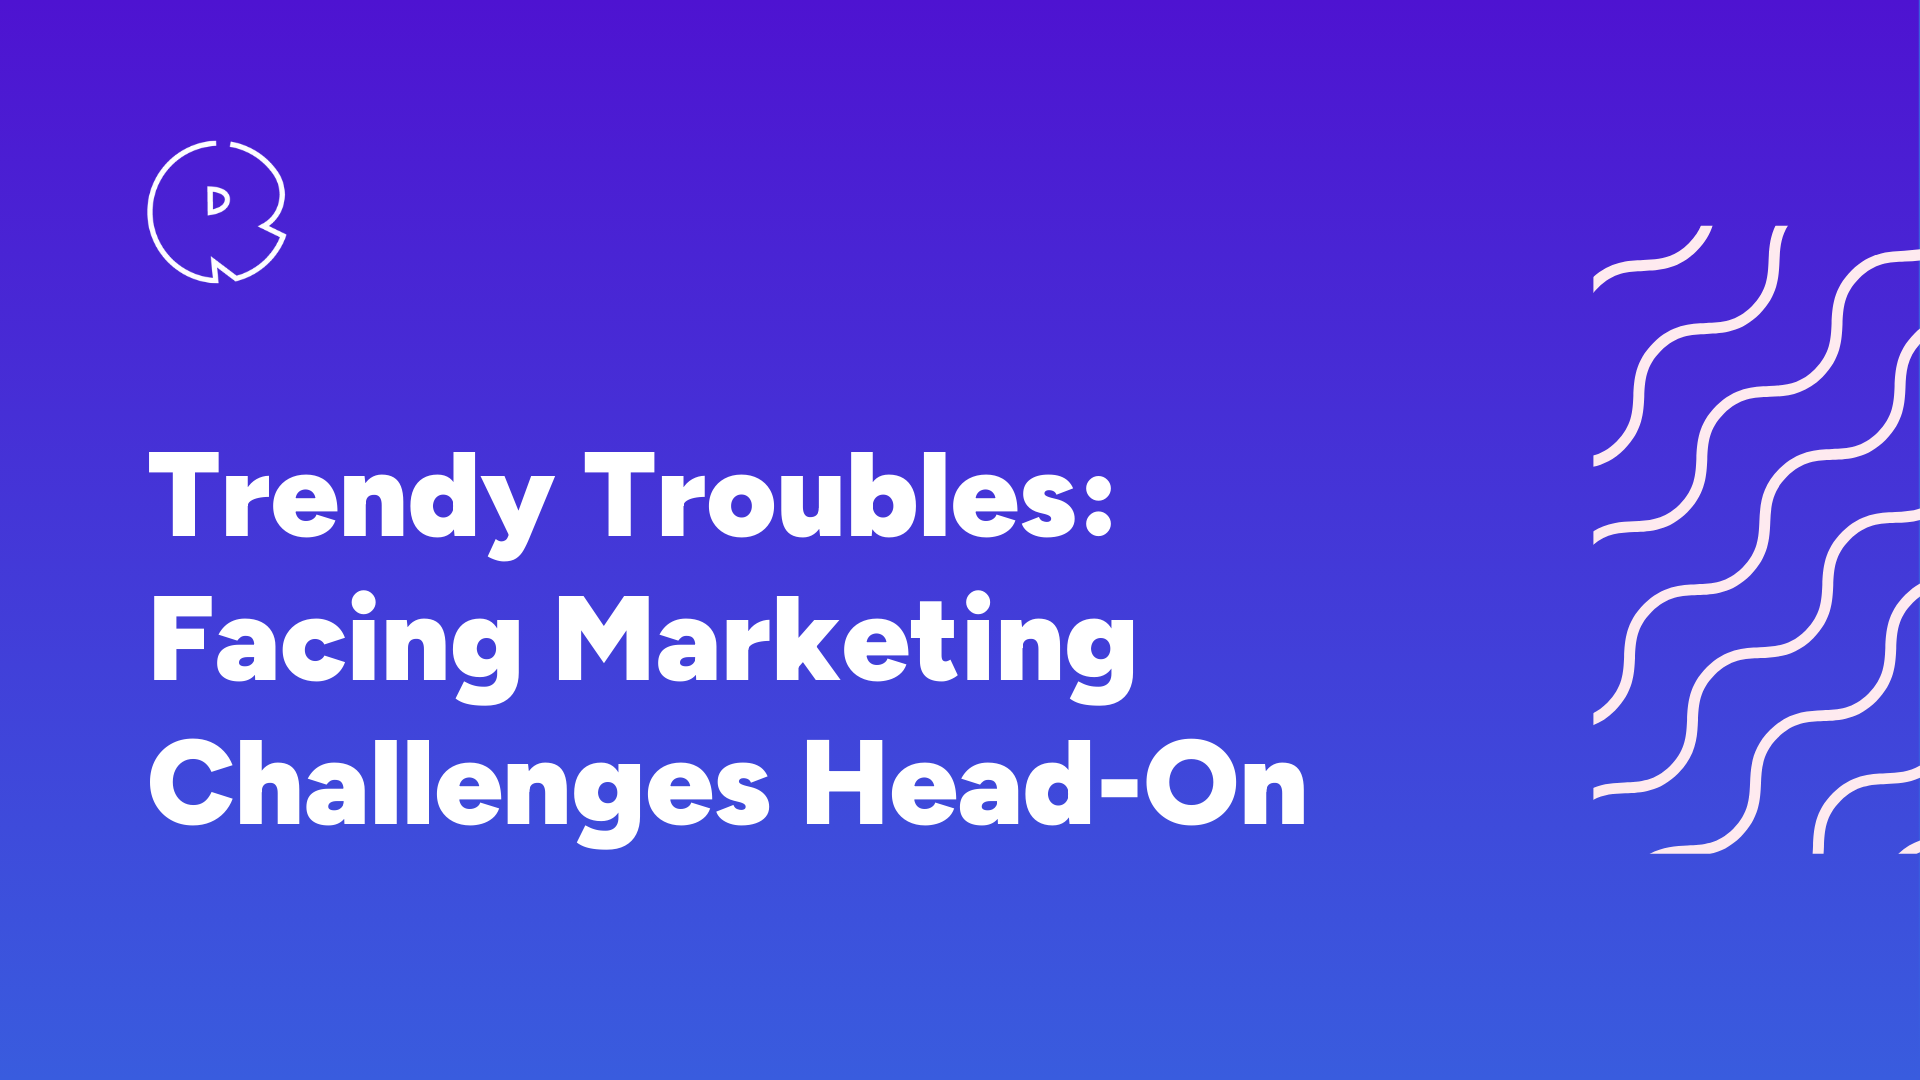 Trendy Troubles: Facing Marketing Challenges Head-On